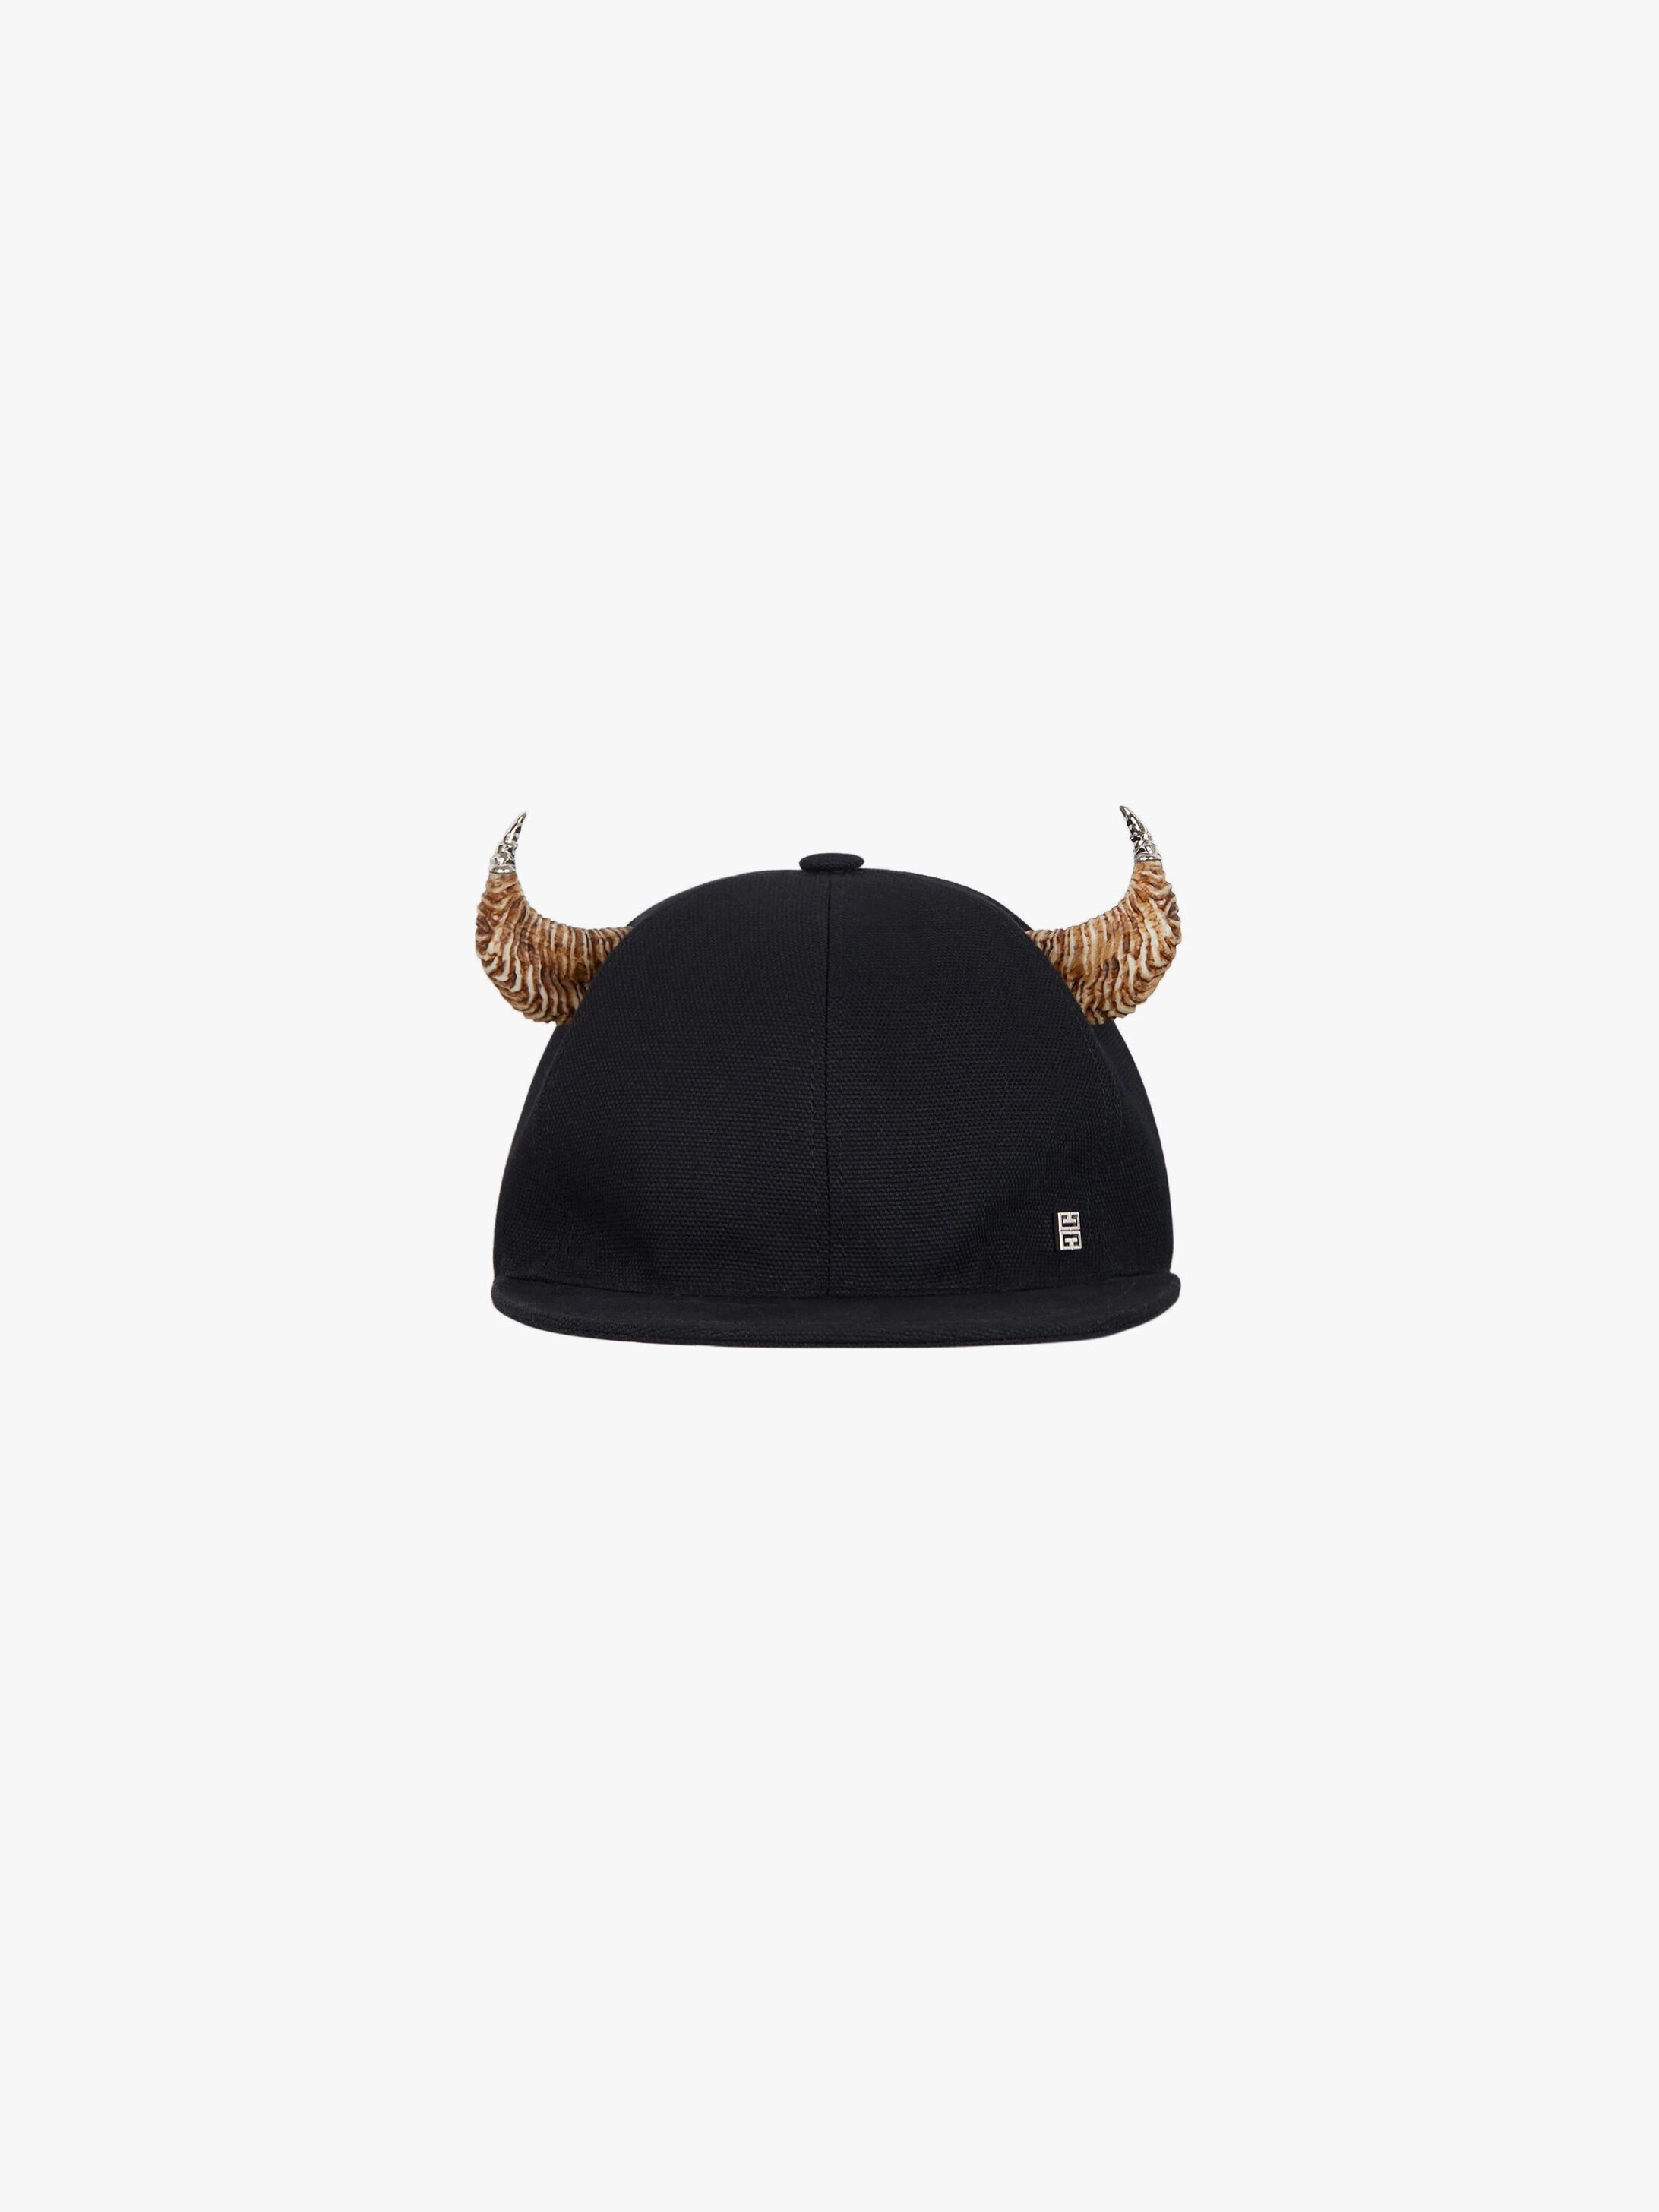 CAP IN CANVAS WITH HORNS - 1